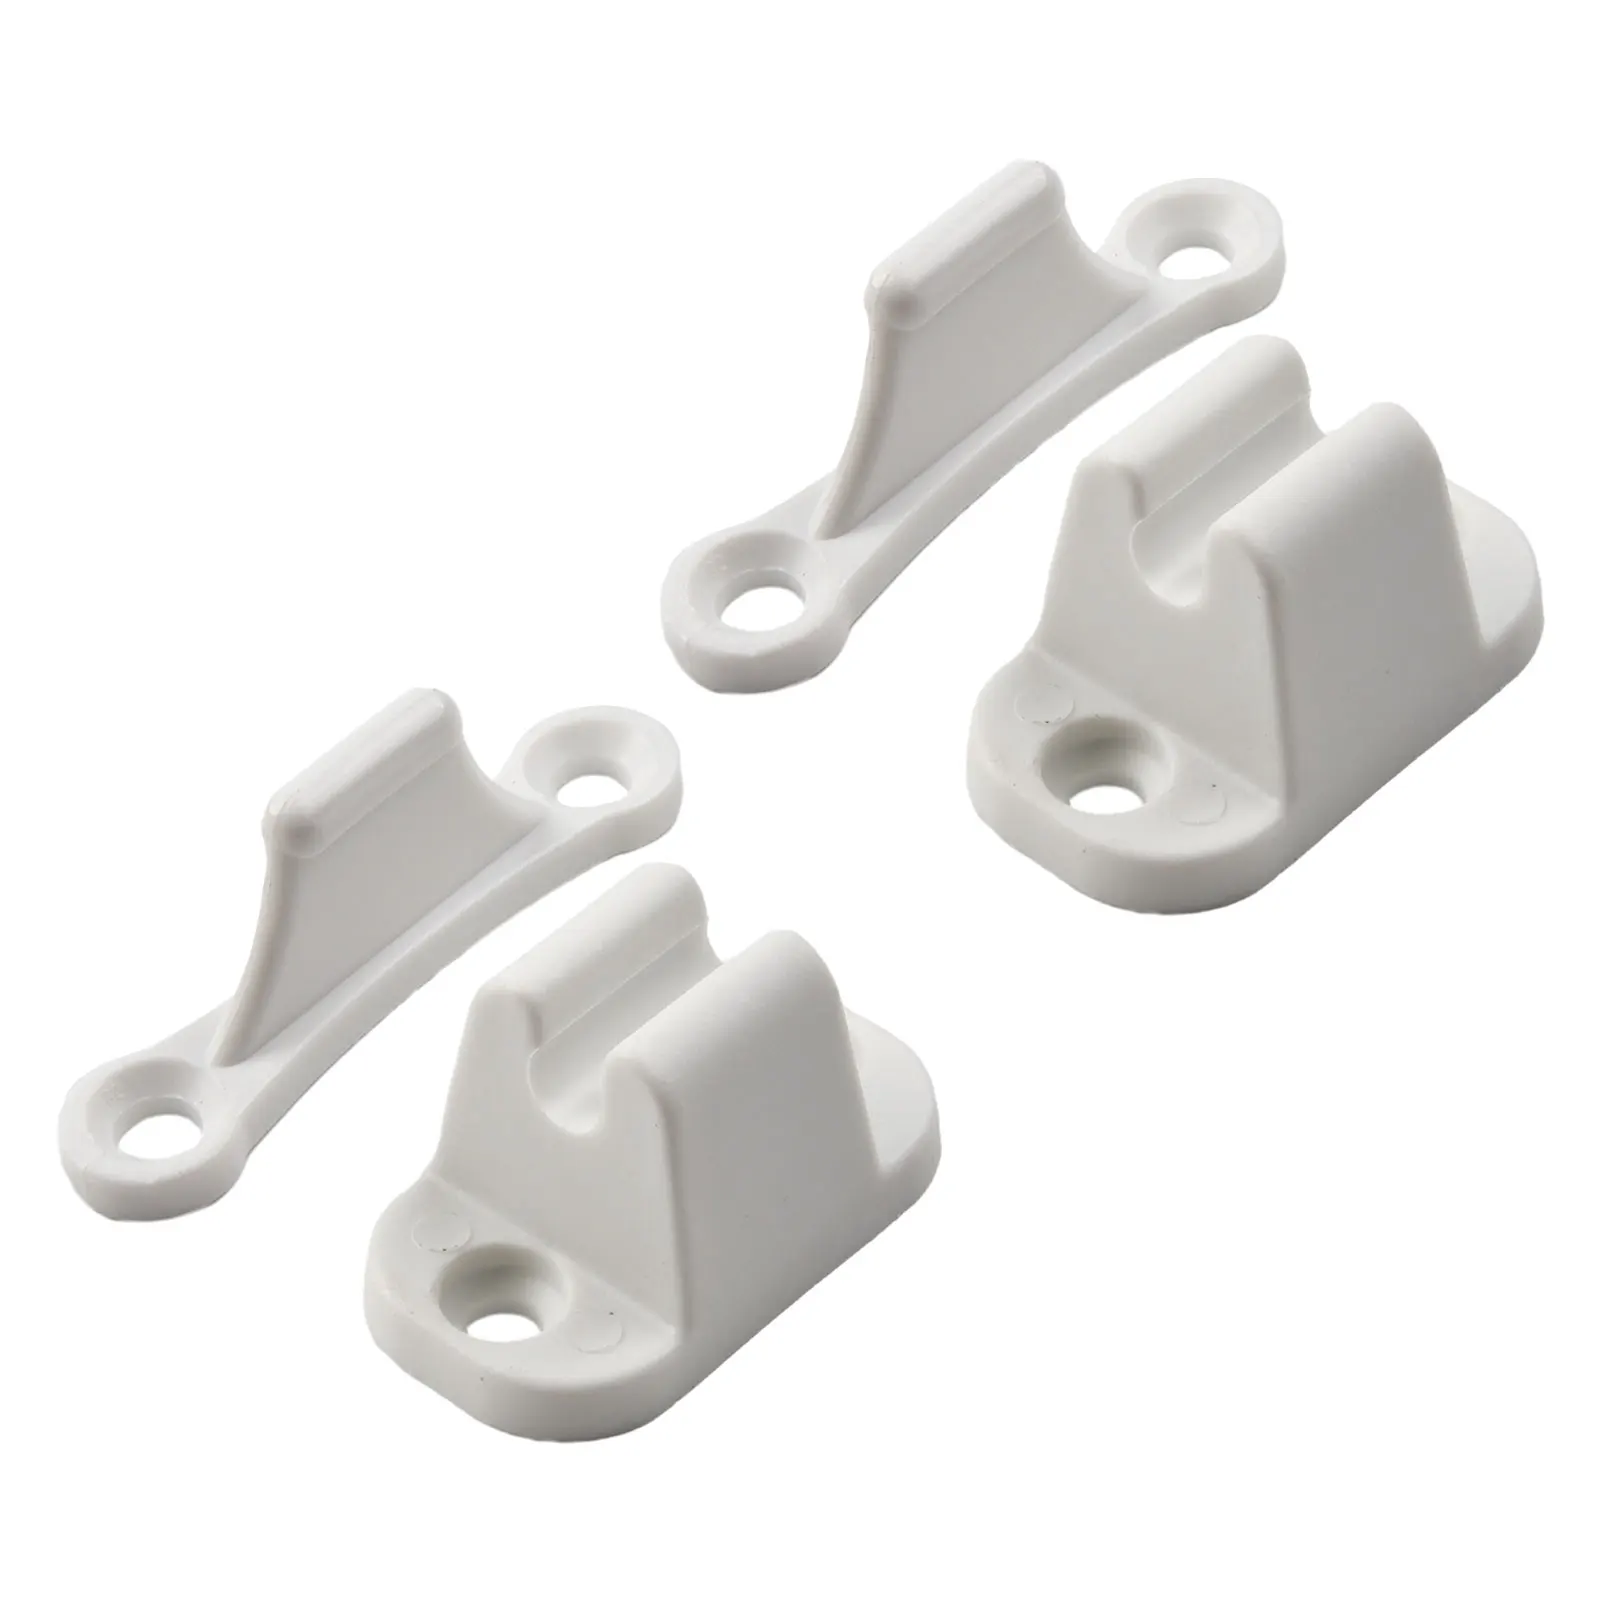 Brand New Door Retainer Catch Door Catch Female Section Male Section Nylon Shocks And Noise White Color 2pcs Elddis